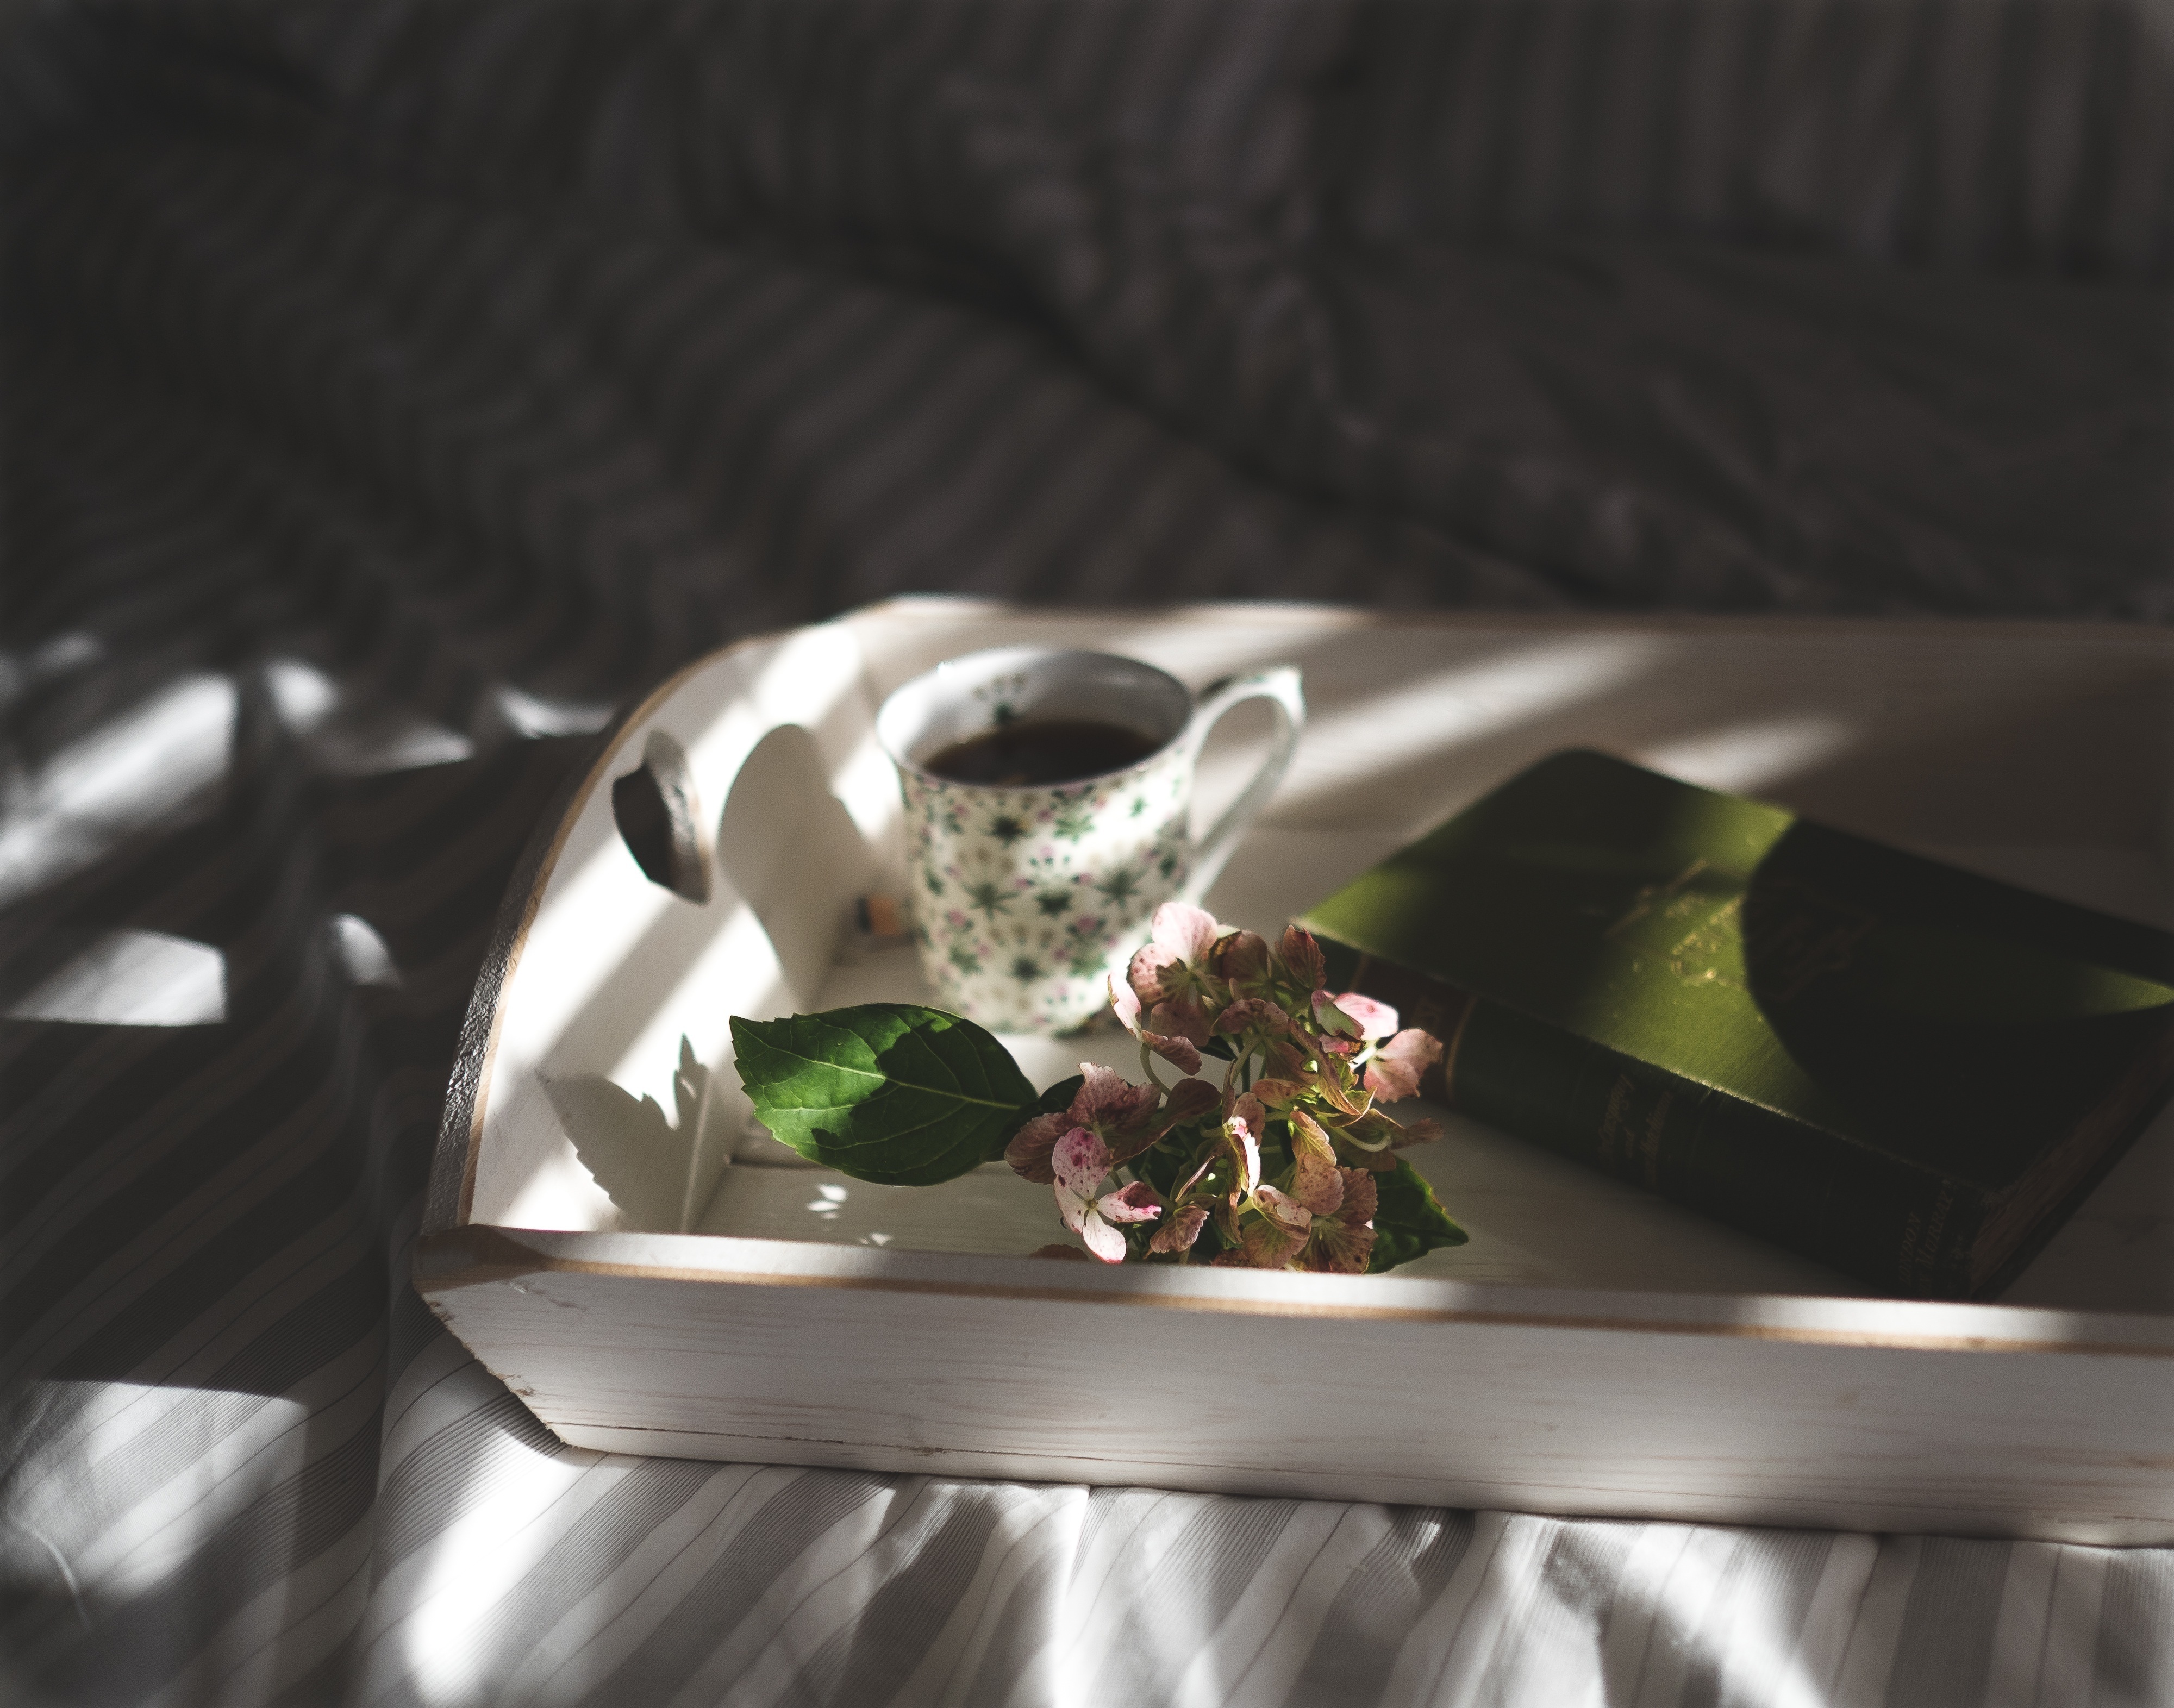 Phone Wallpaper (No watermarks) morning, miscellaneous, flower, book